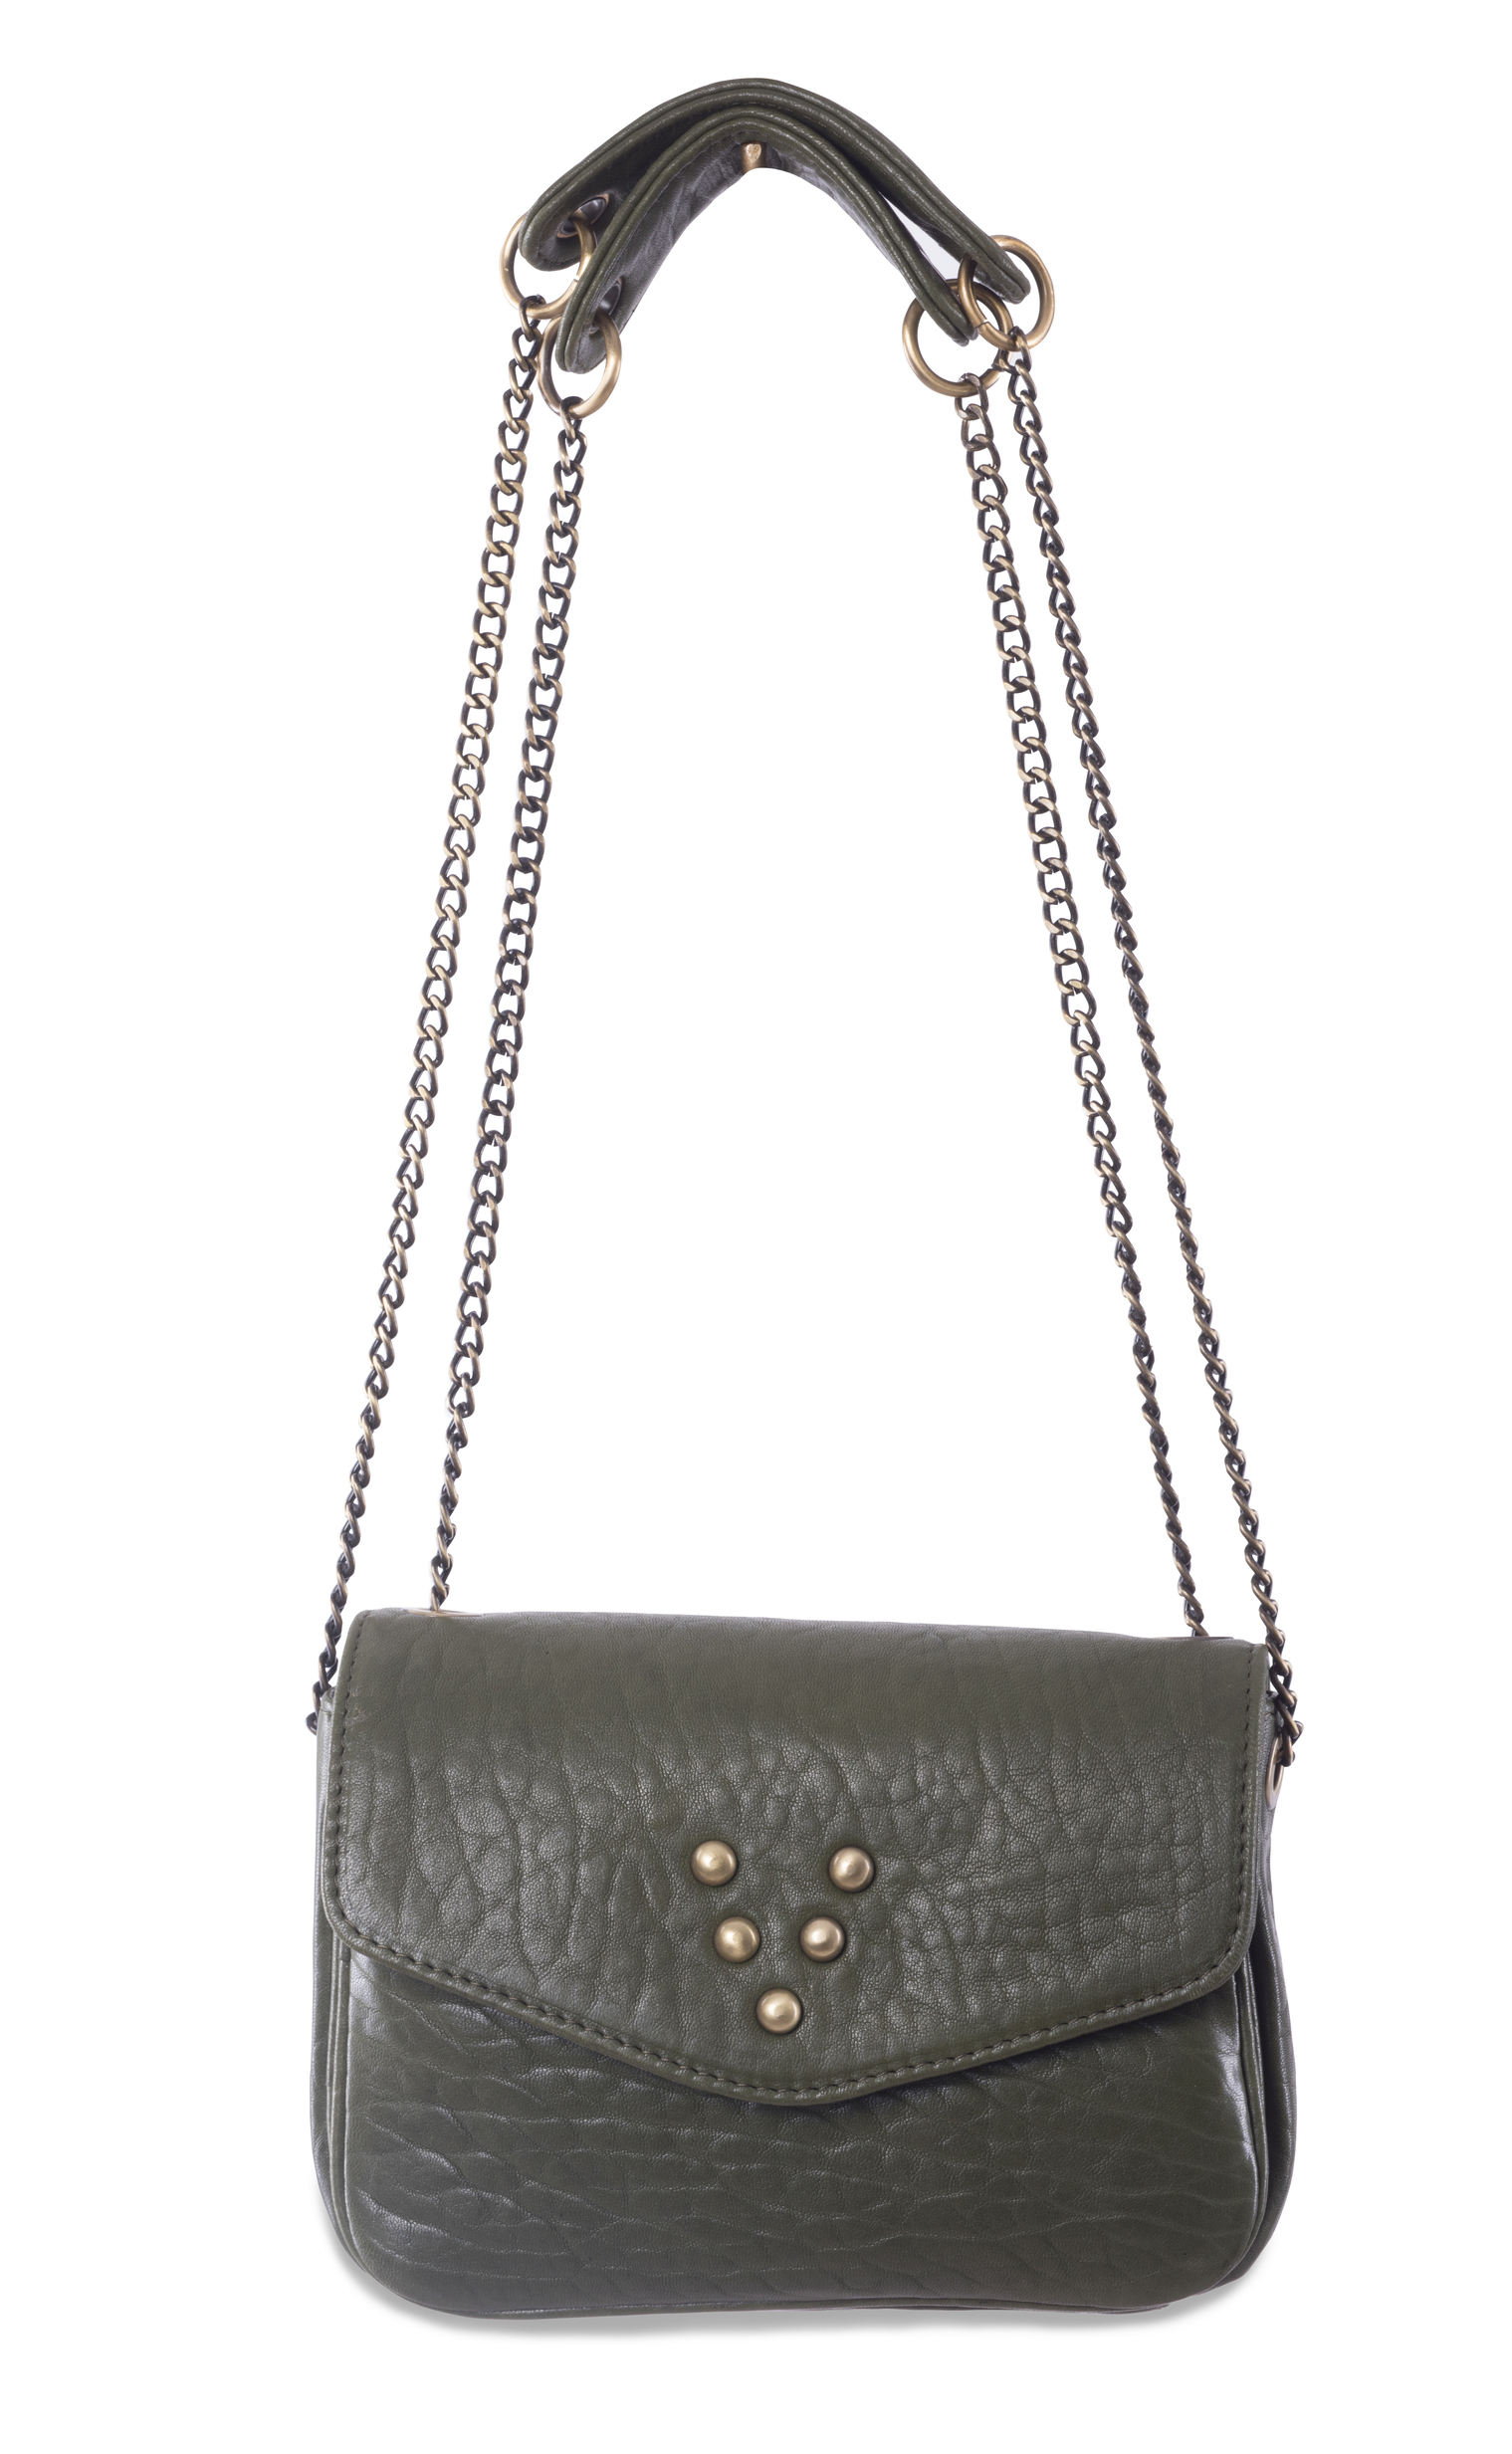 SAC_VIRGINIE_DARLING_MINI_CHACHA_BUBBLE_SPINASH_LEATHER